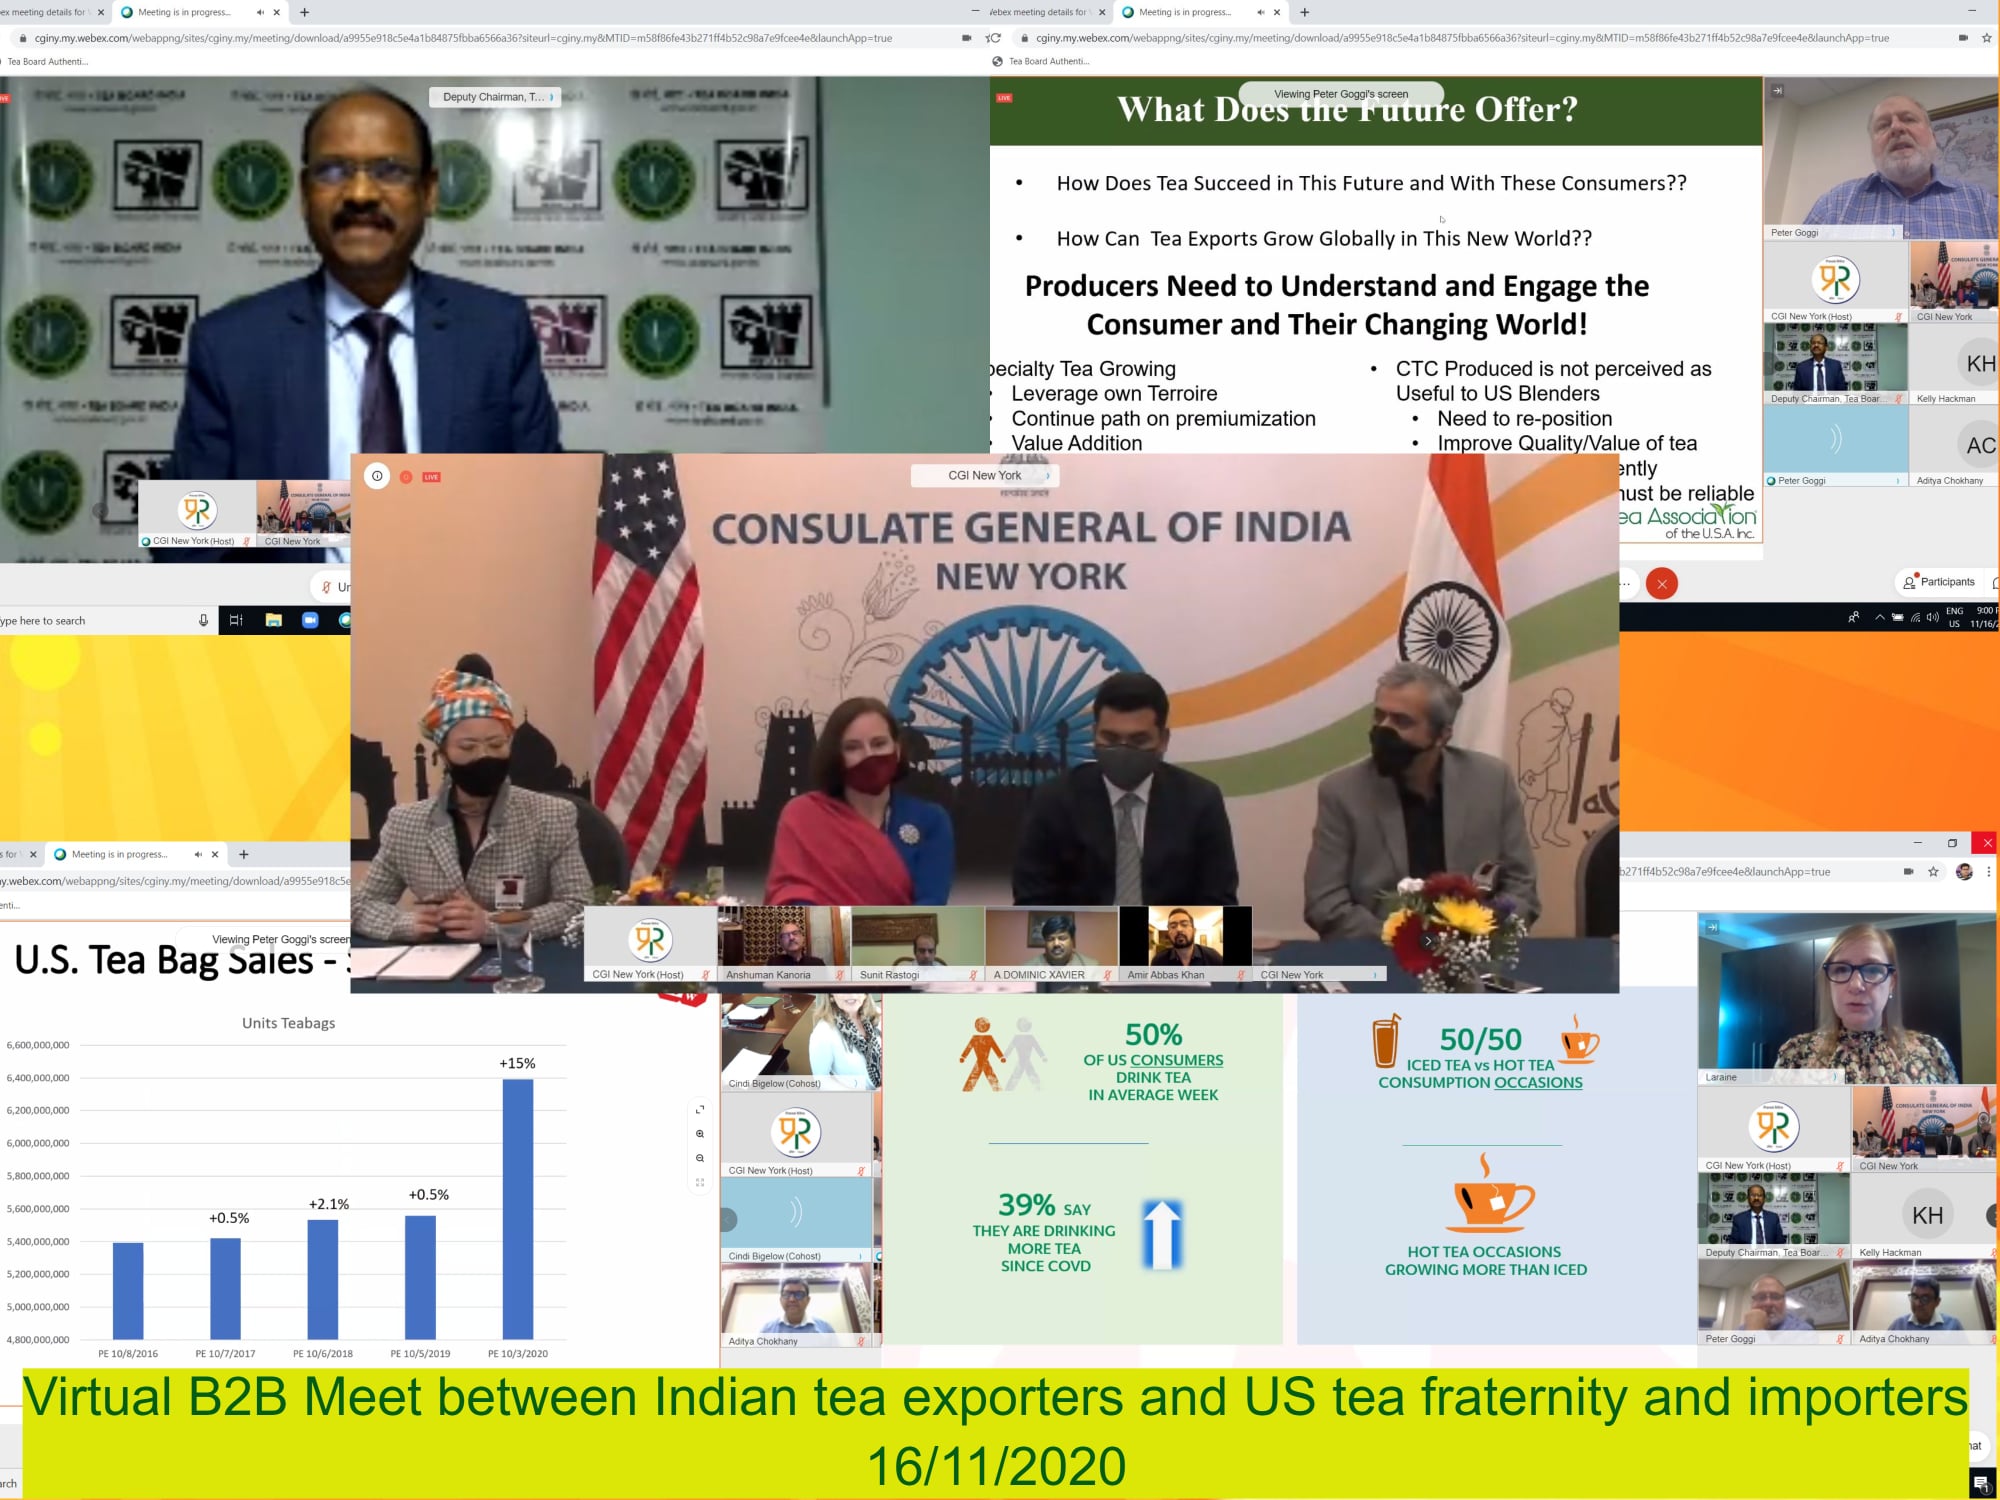 Virtual B2B Meet between Indian tea exporters and US tea fraternity and importers 16/11/2020